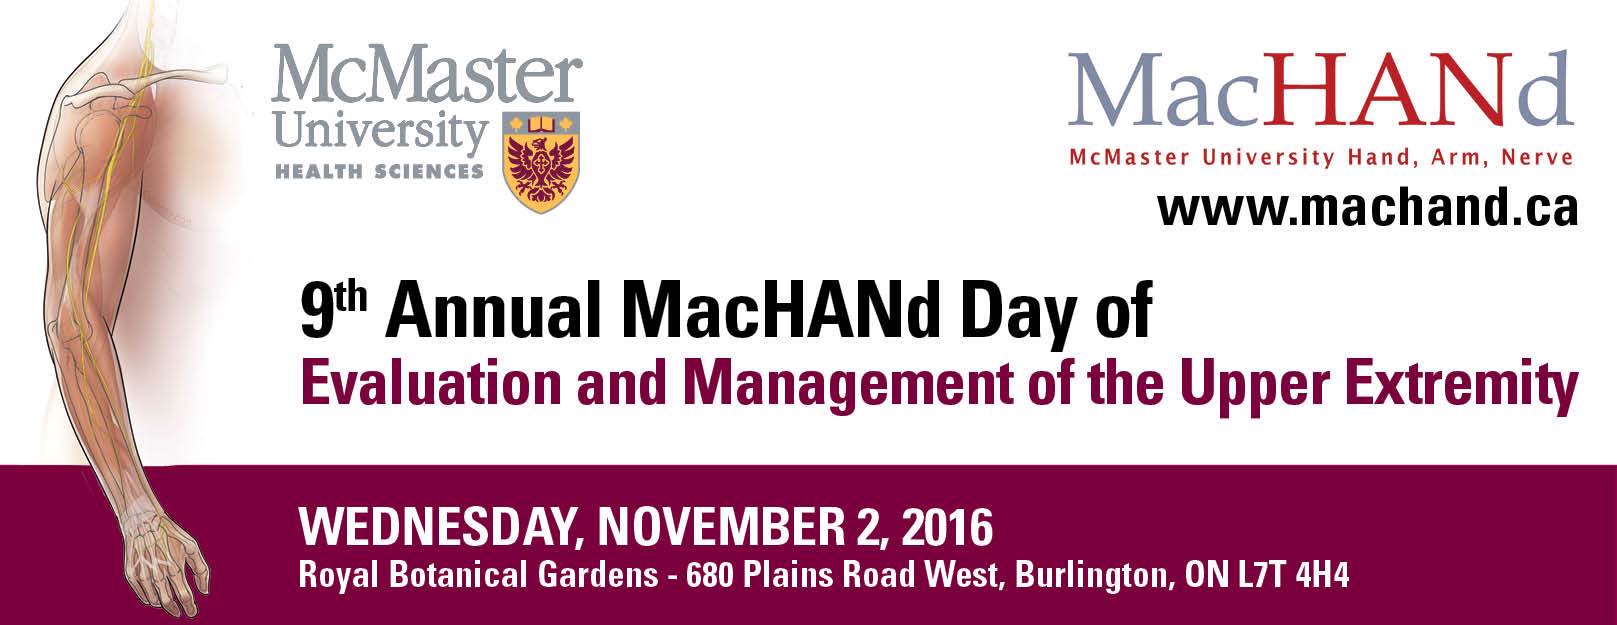 9th Annual MacHANd Day of Evaluation and Management of the Upper Extremity